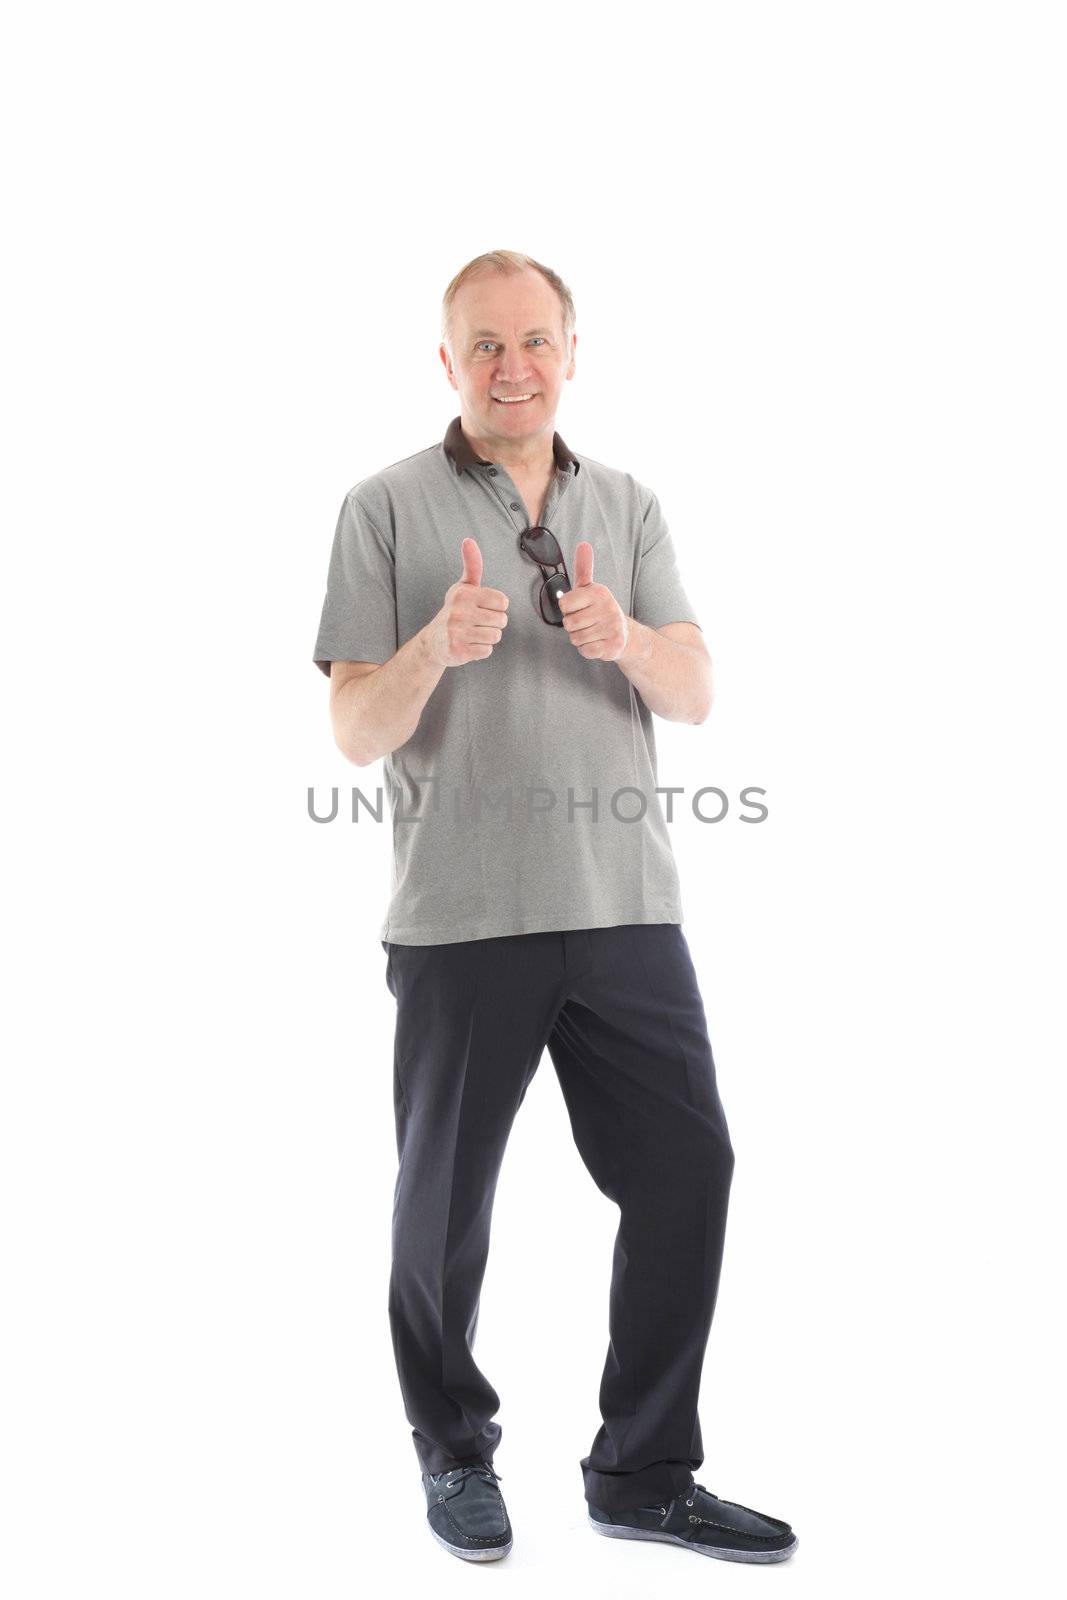 Full length studio portrait of a fashionable smiling middle-aged man giving a thumbs up gesture of approval and success Full lrngth studio portrait of a fashionable smiling middle-aged man giving a thumbs up gesture of approval and success